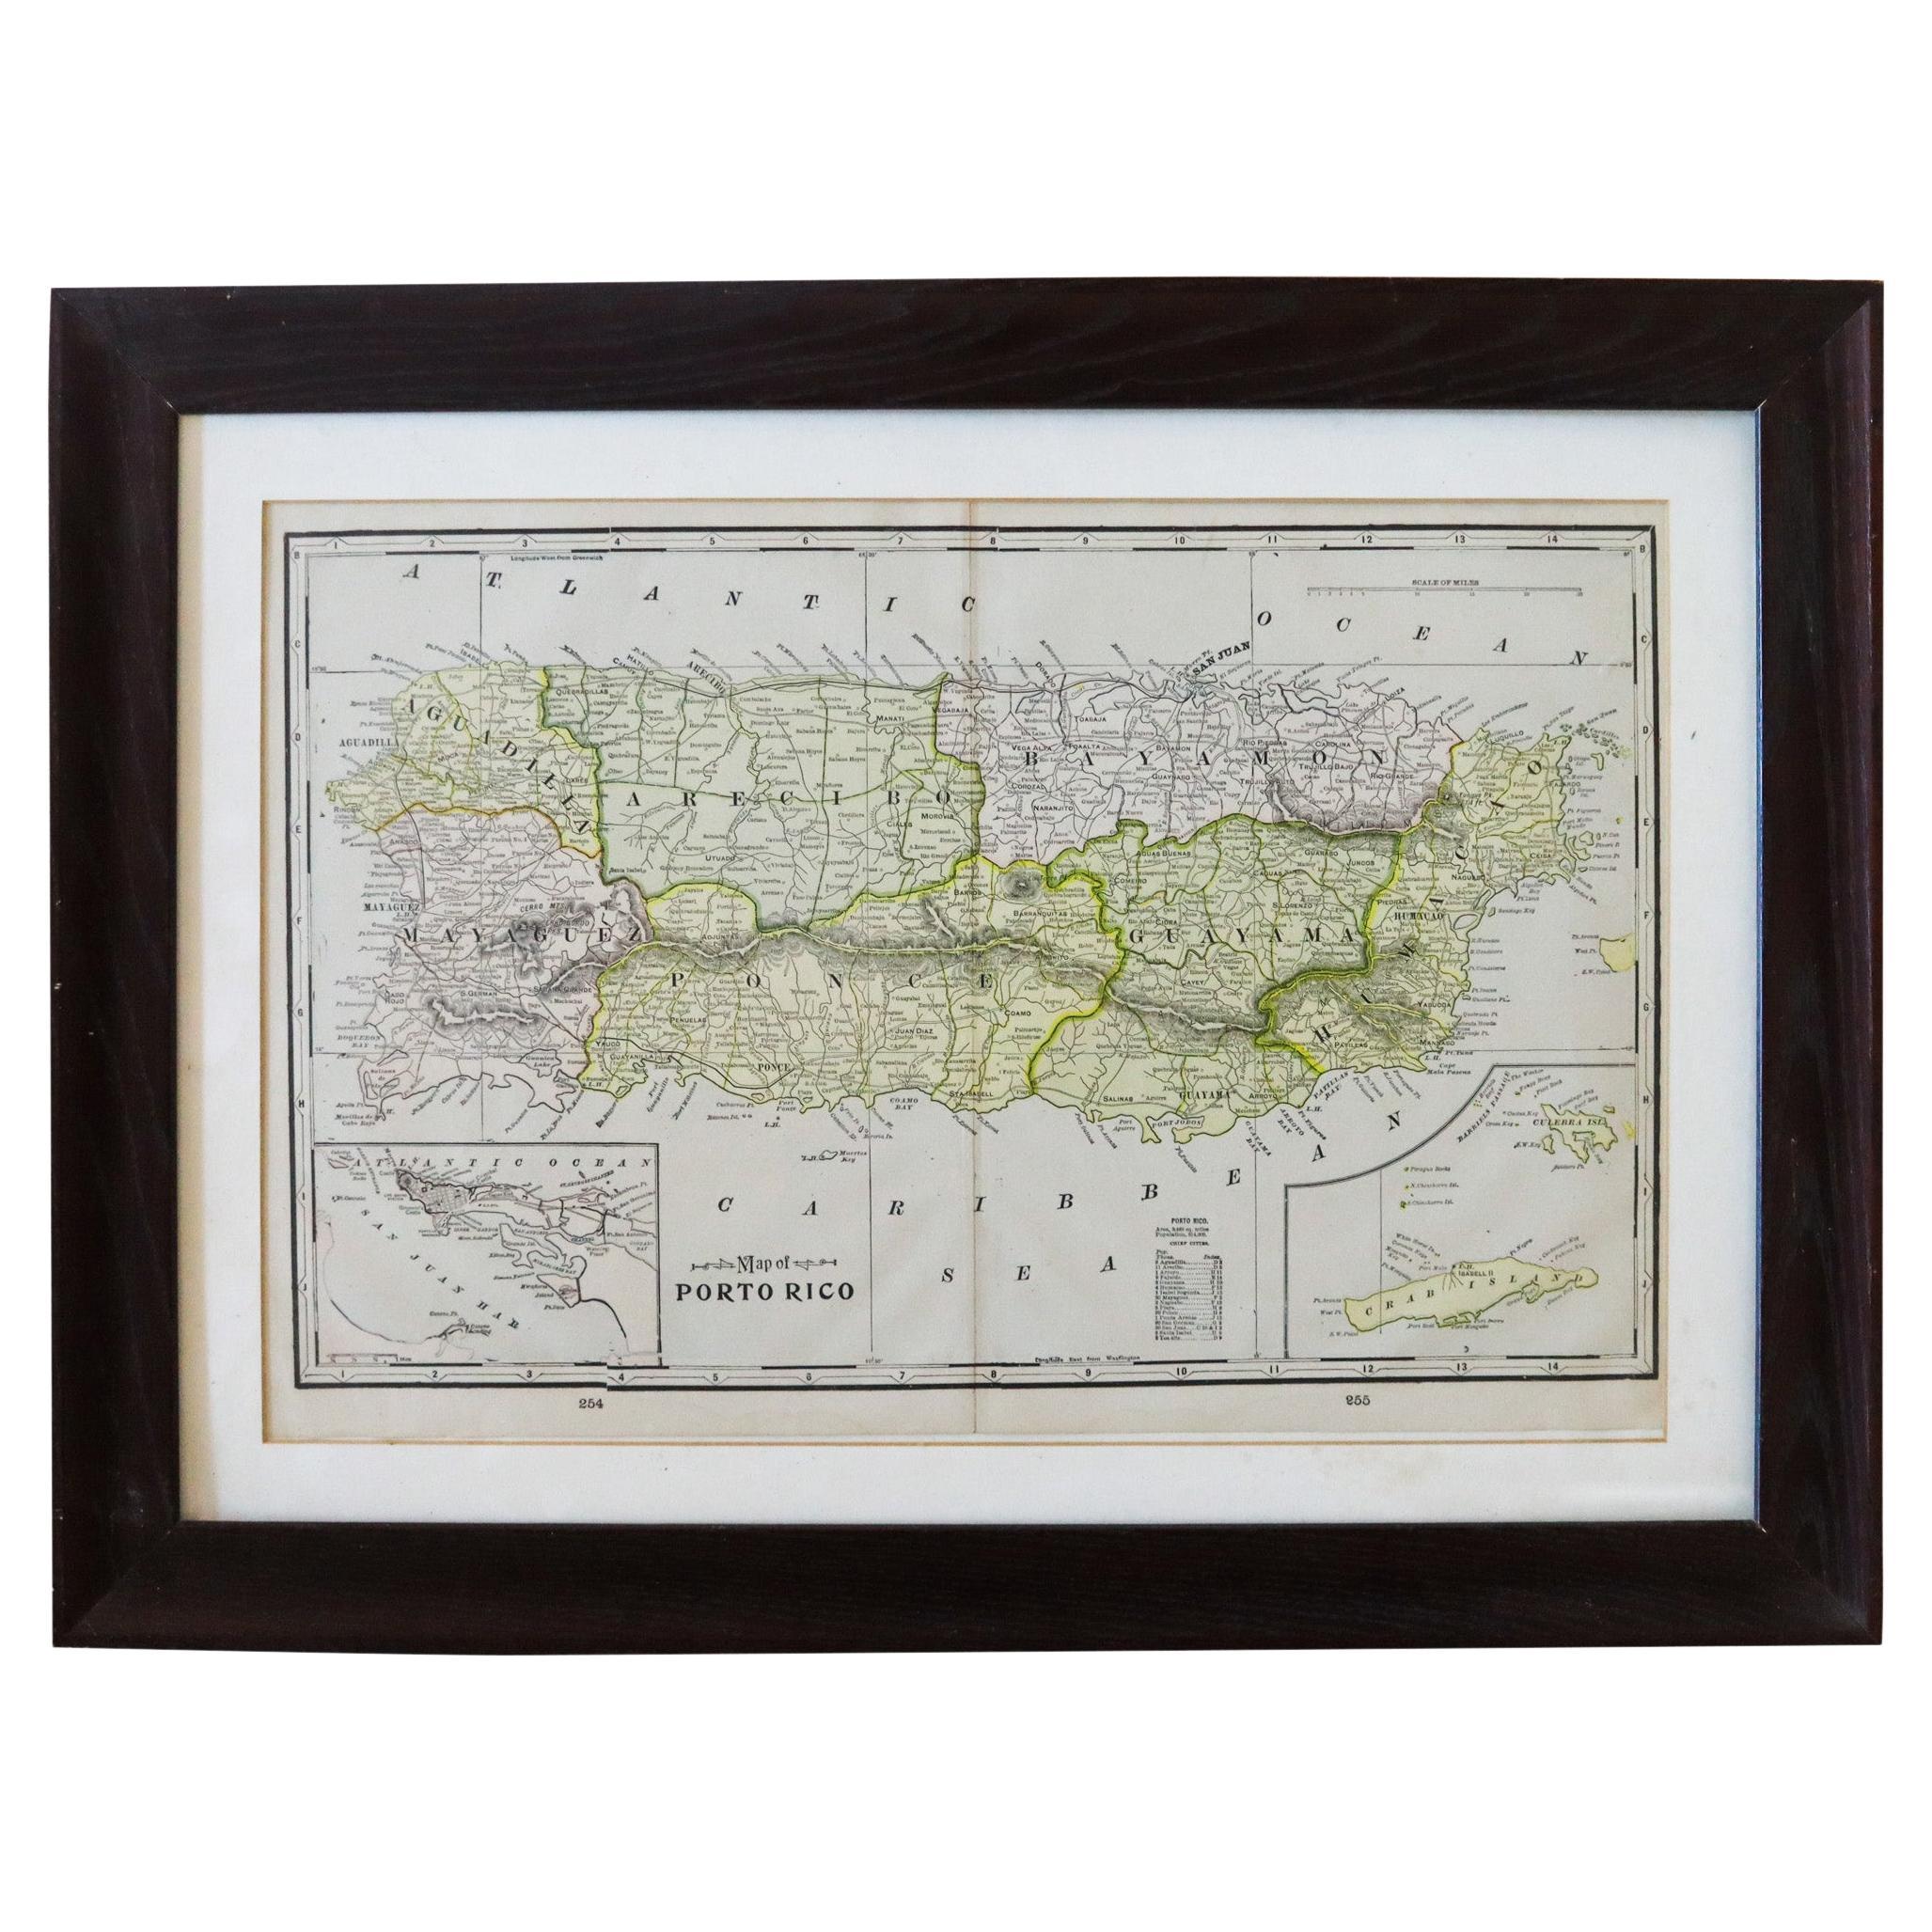 Puerto Rico 1910 Original Antique Map Of The Island In A Period Wood Frame For Sale